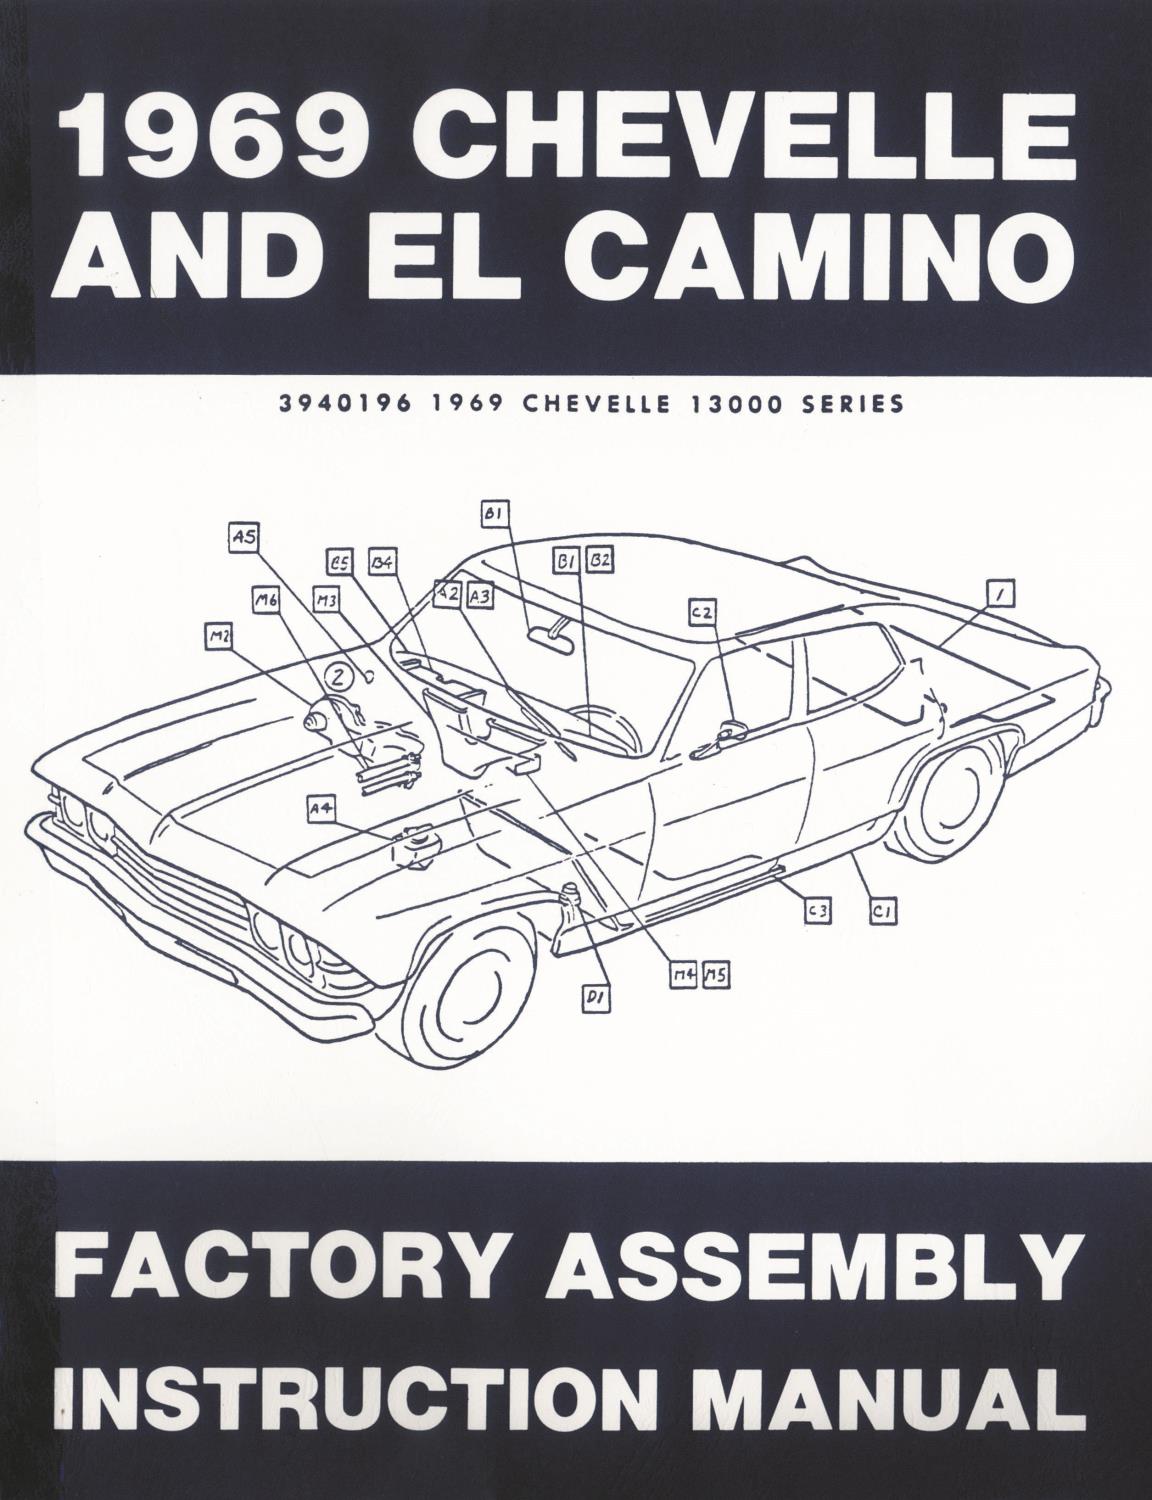 Factory Assembly Instruction Manual for 1969 Chevrolet Chevelle and El Camino